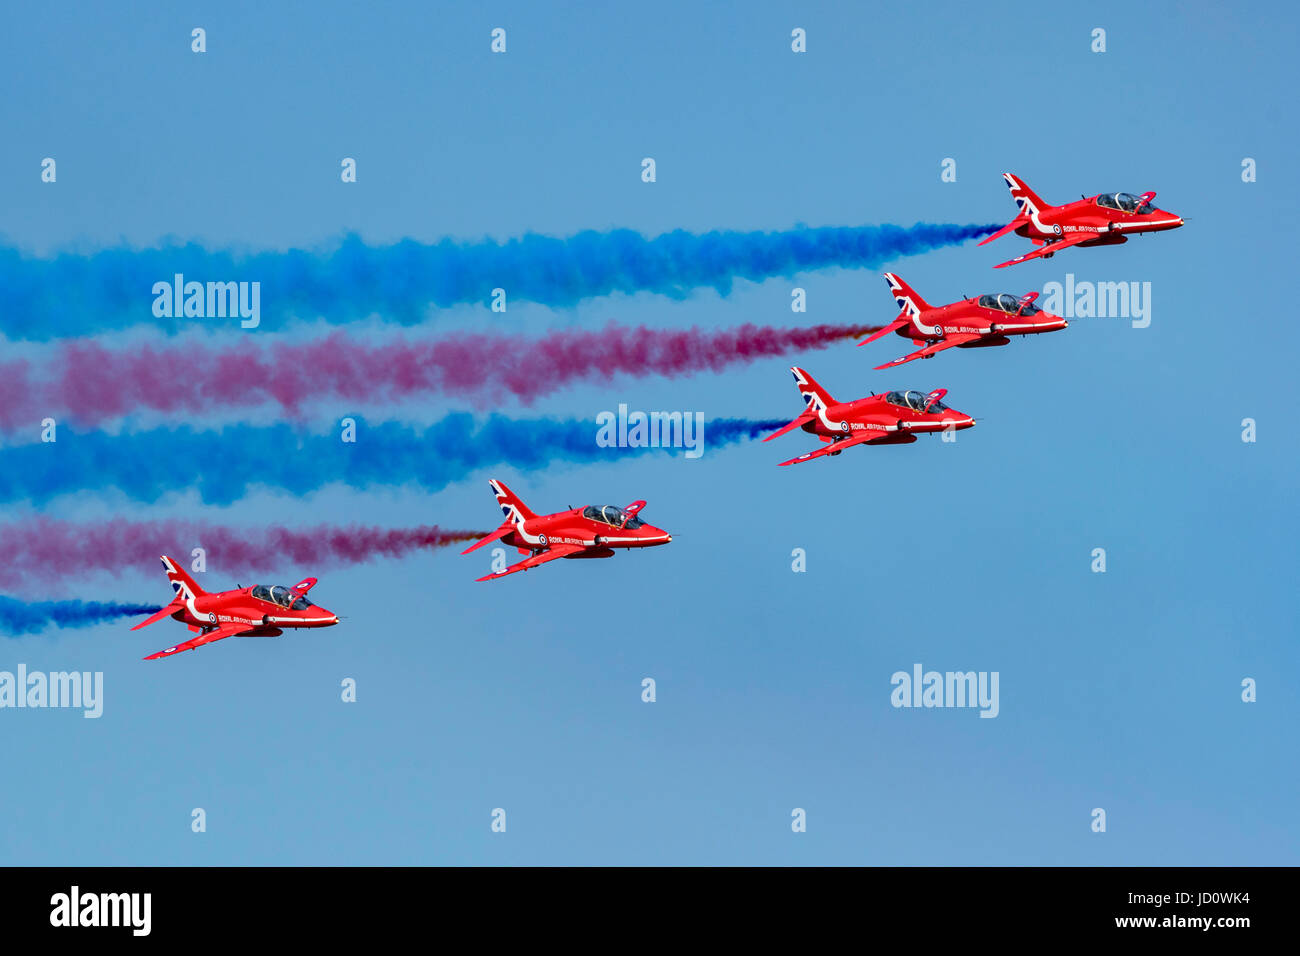 Weston-super-Mare, UK. 17th June, 2017. The RAF Red Arrows Aerobatic Team carr out a stunning display in blue summer skies at Weston Air Festival, located in Weston-super-Mare, UK. Credit: Bob Sharples/Alamy Live News Stock Photo